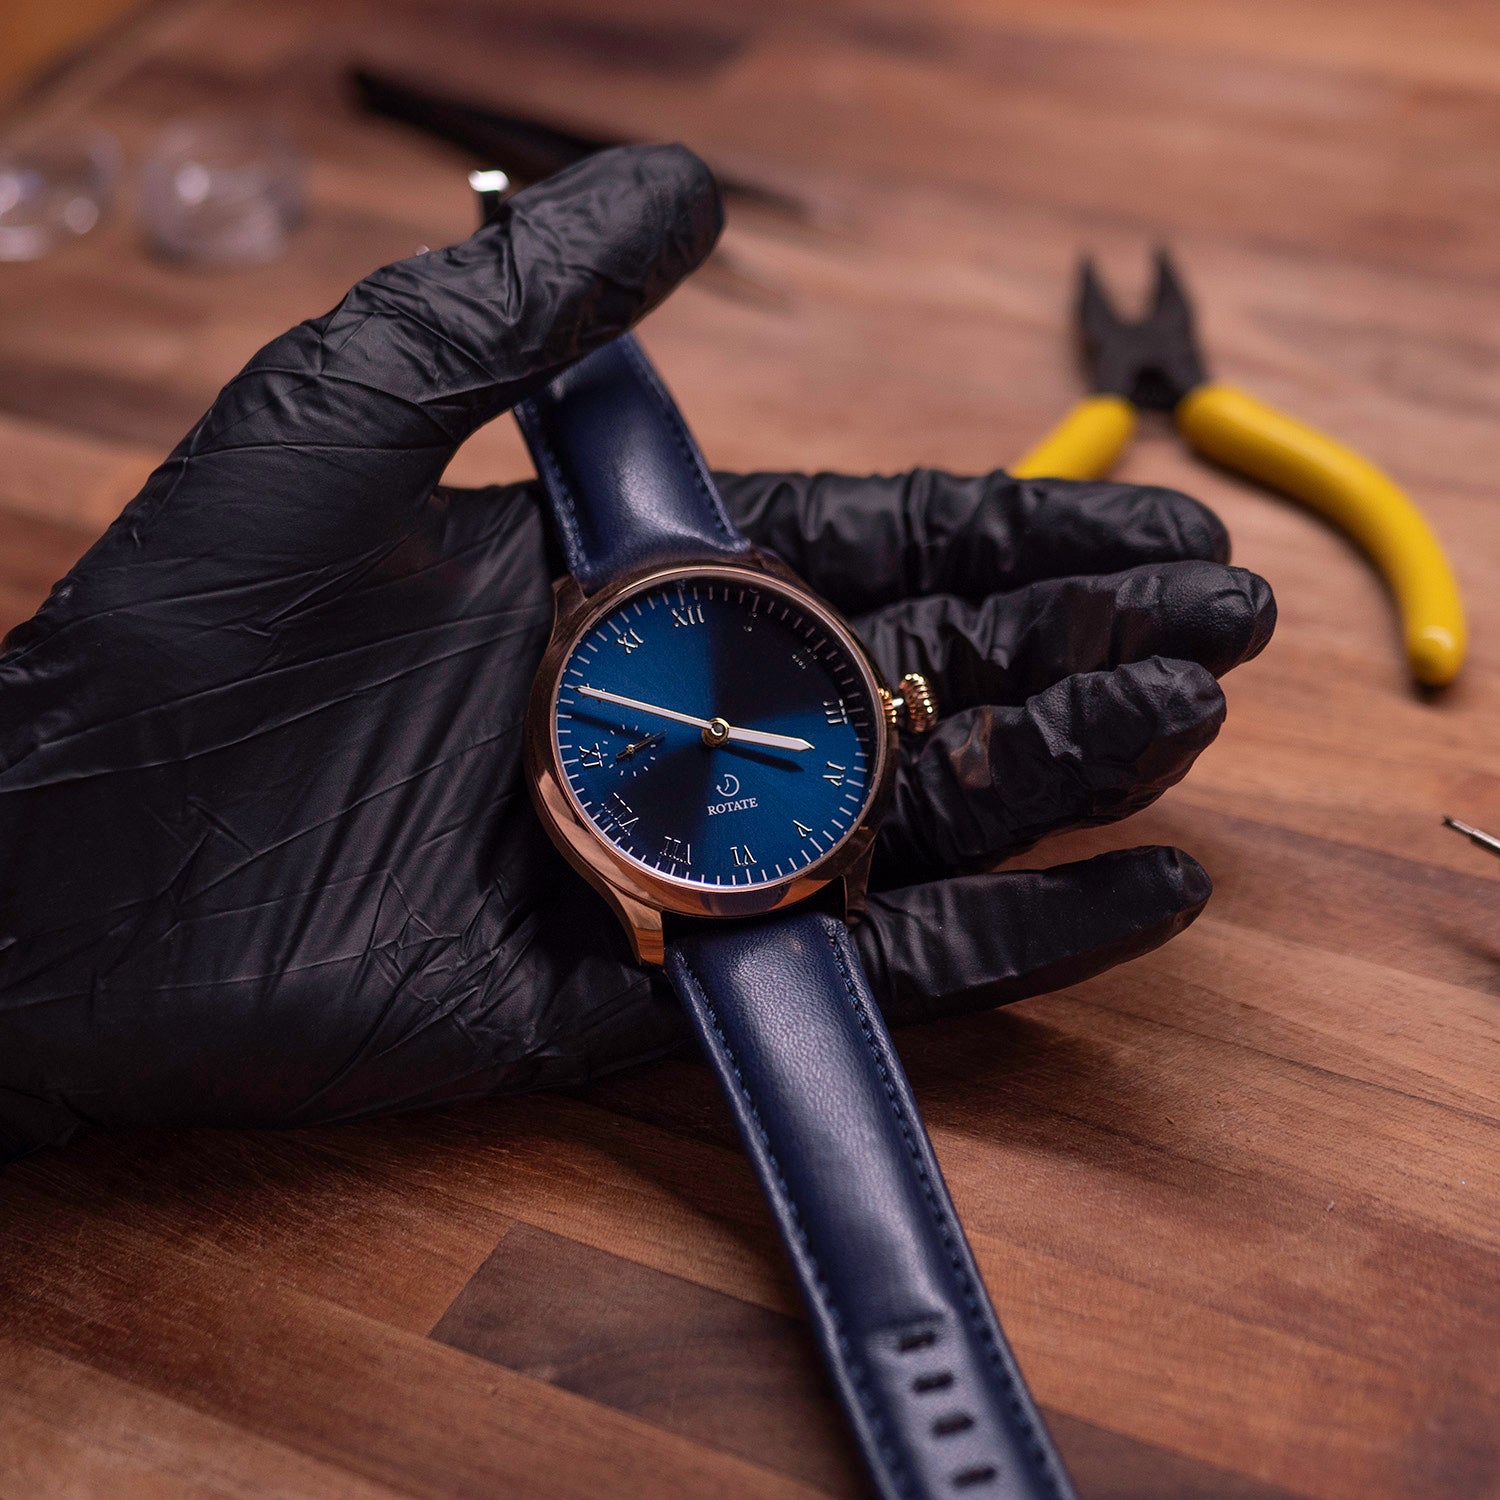 Build your own watch with a Rotate watchmaking kit - The Gadgeteer